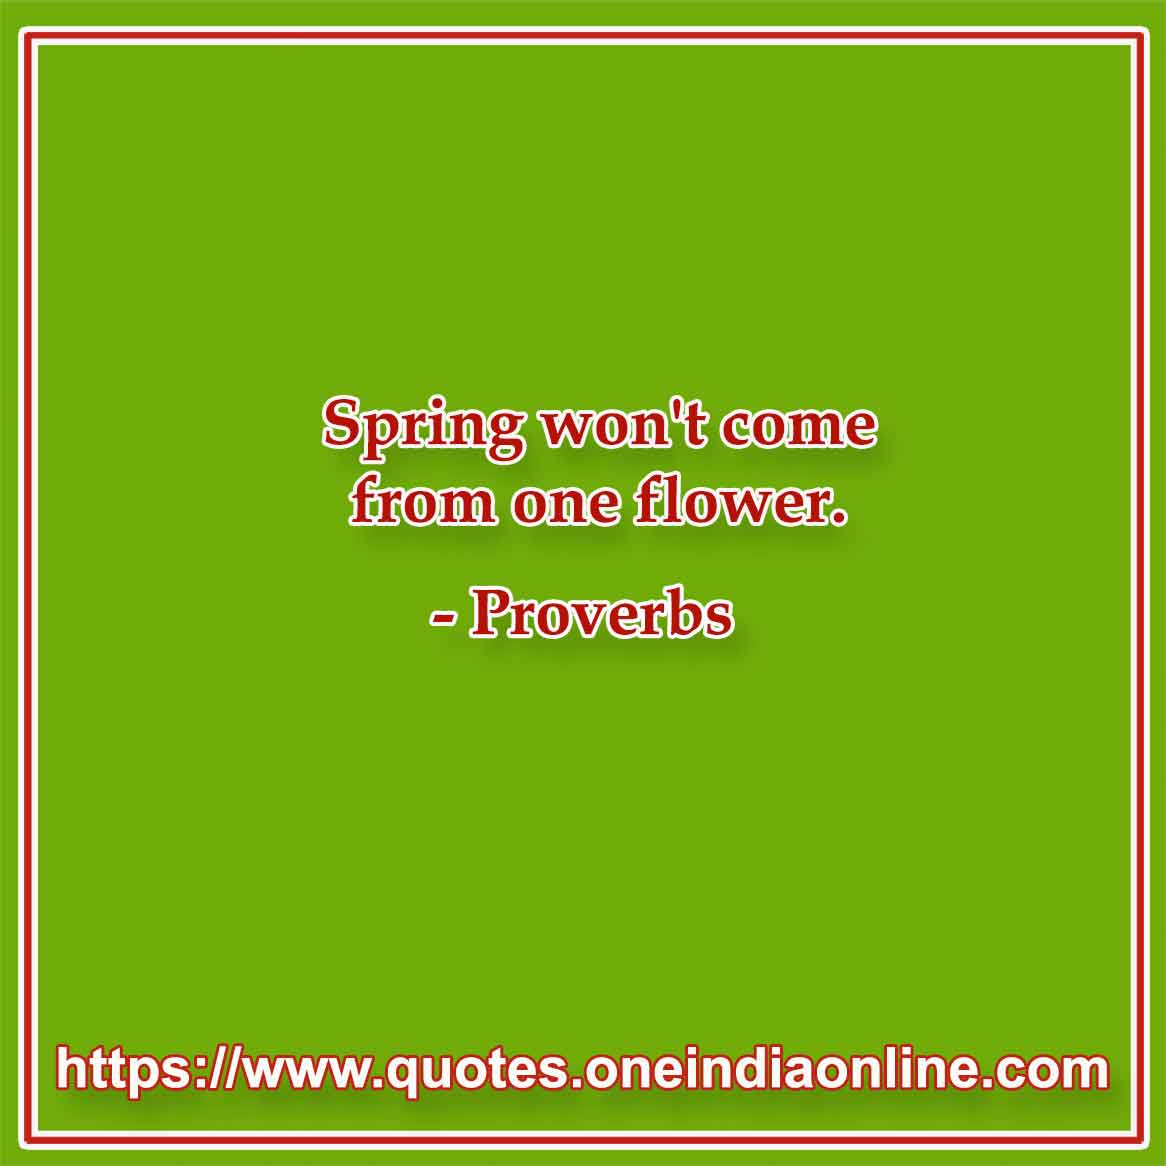 Spring won't come from one flower.

